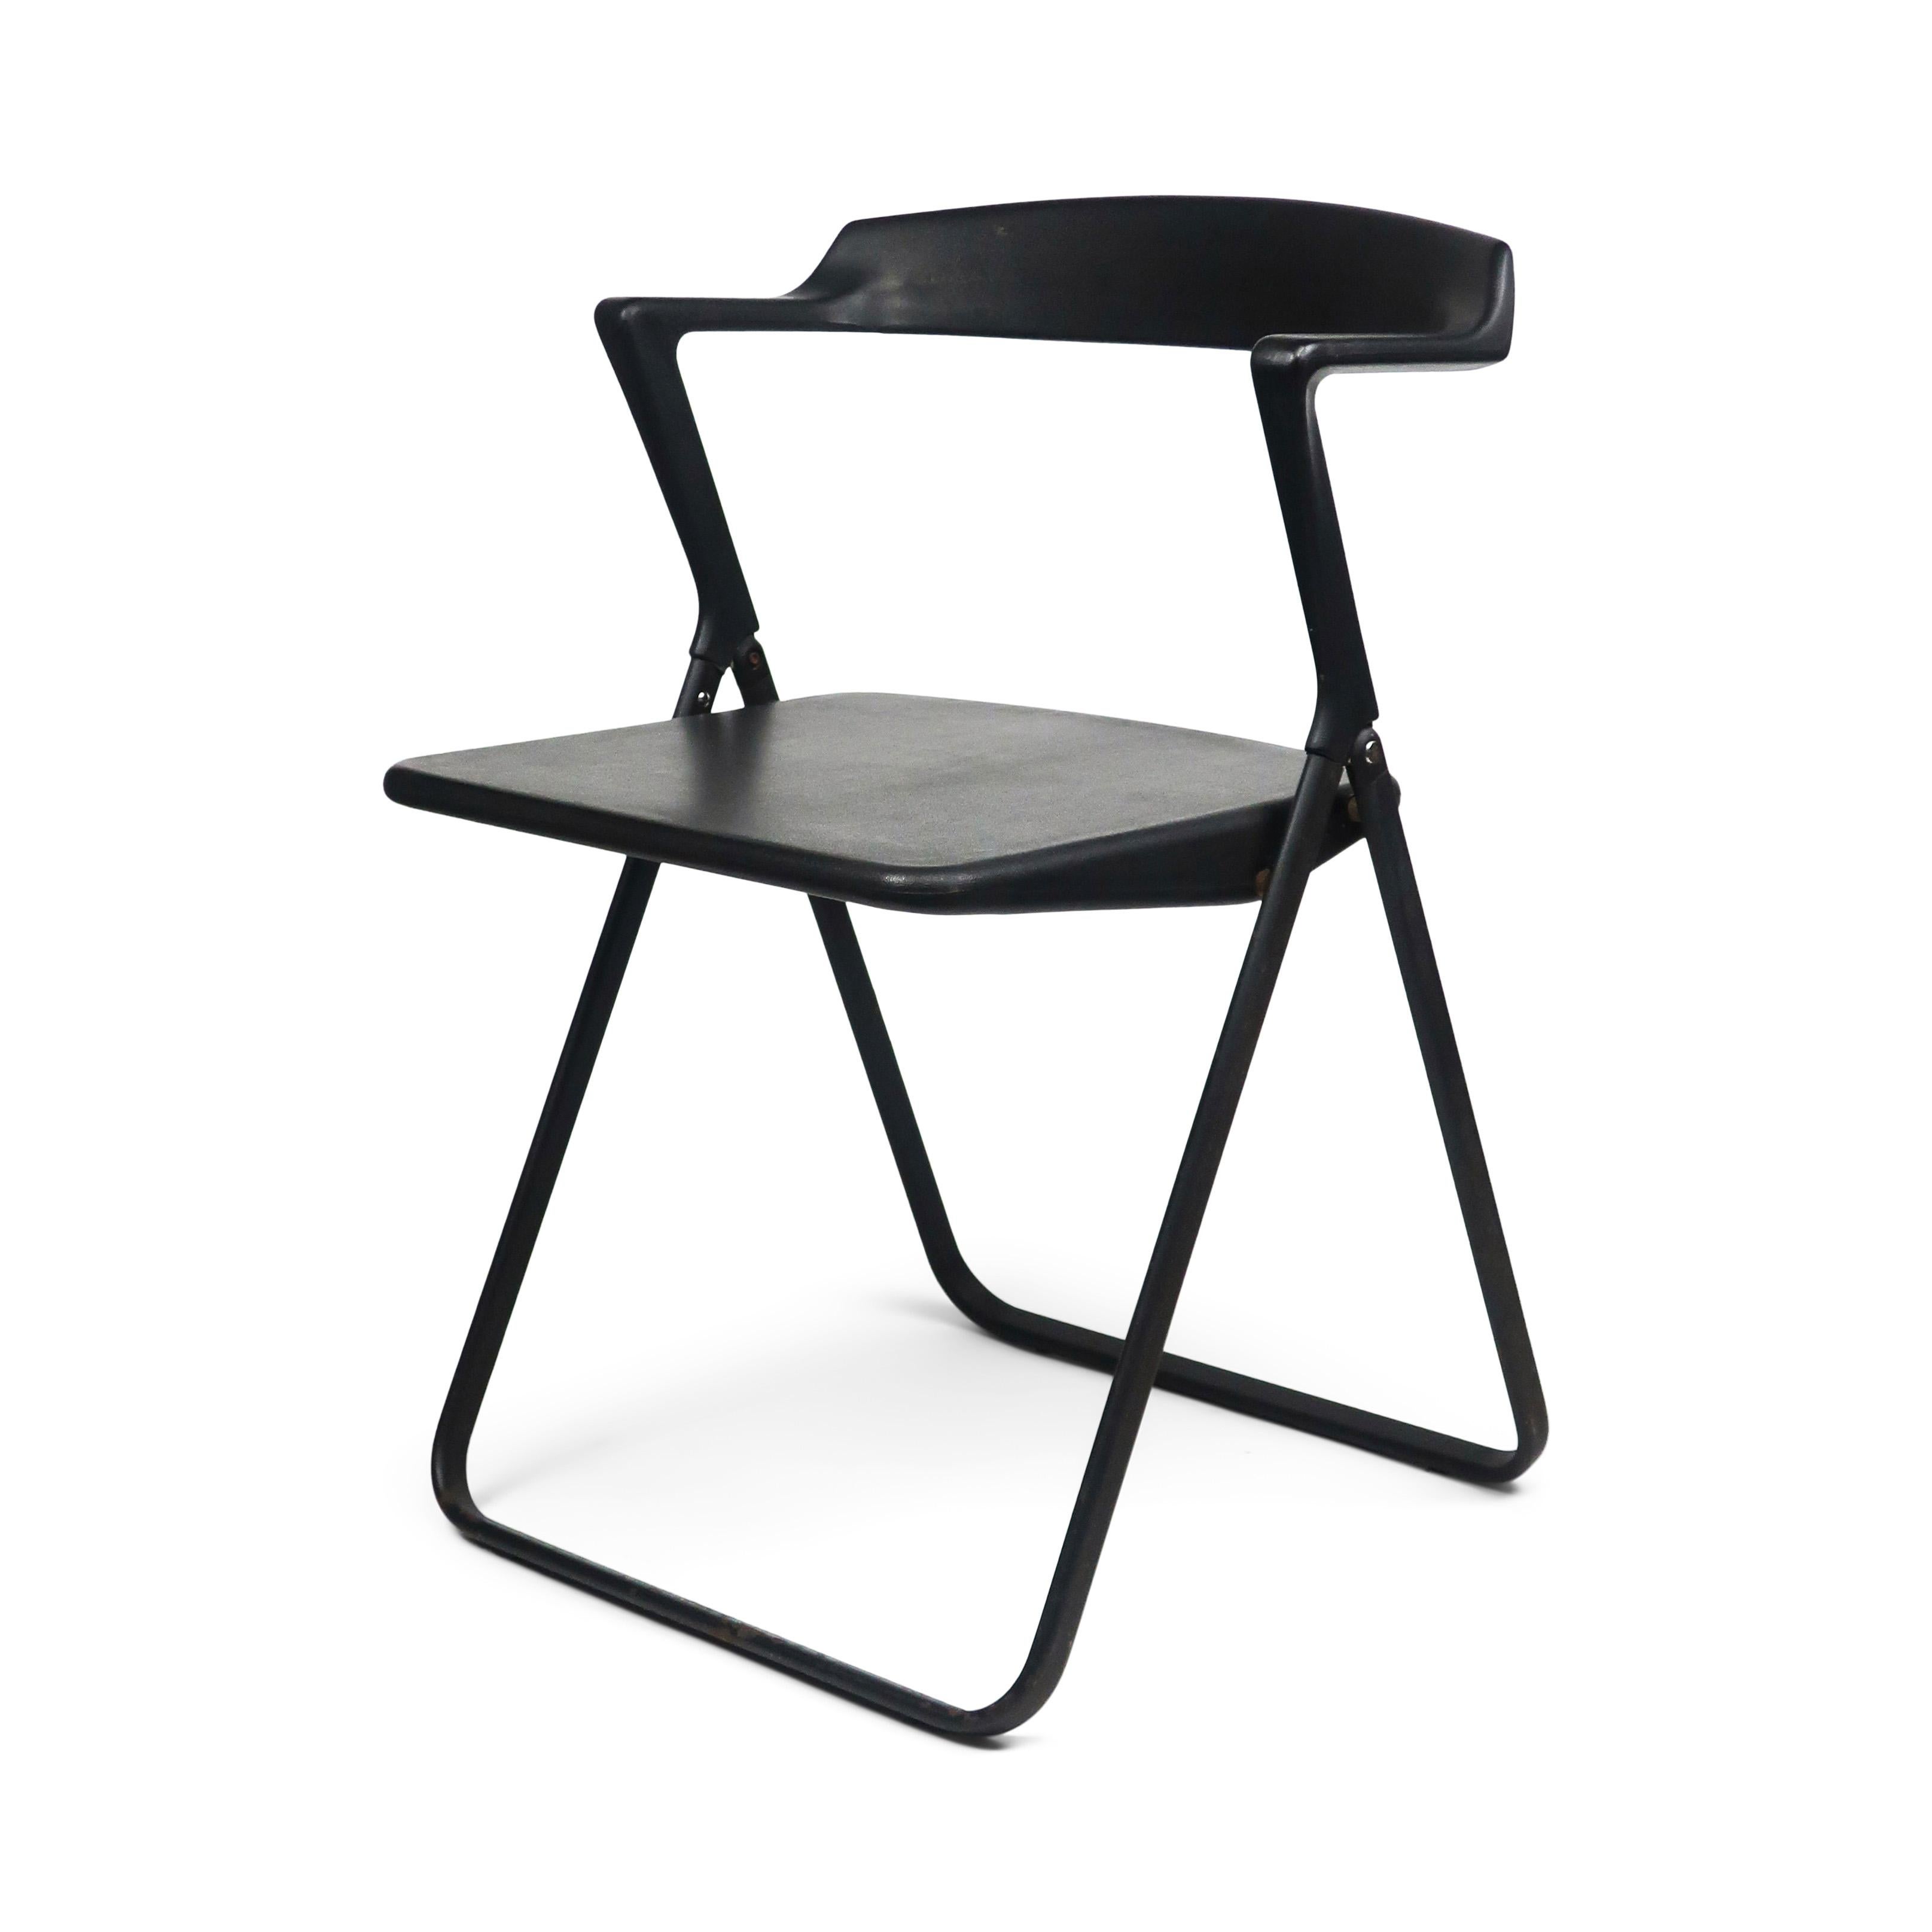 Designed by Motomi Kawakami for Skipper in 1977, the Blitz folding chair epitomizes Postmodern design with a slim yet comfortable chair with a minimal use of material. A set of 4 with black rubber seats, backs and arms and painted steel bases.